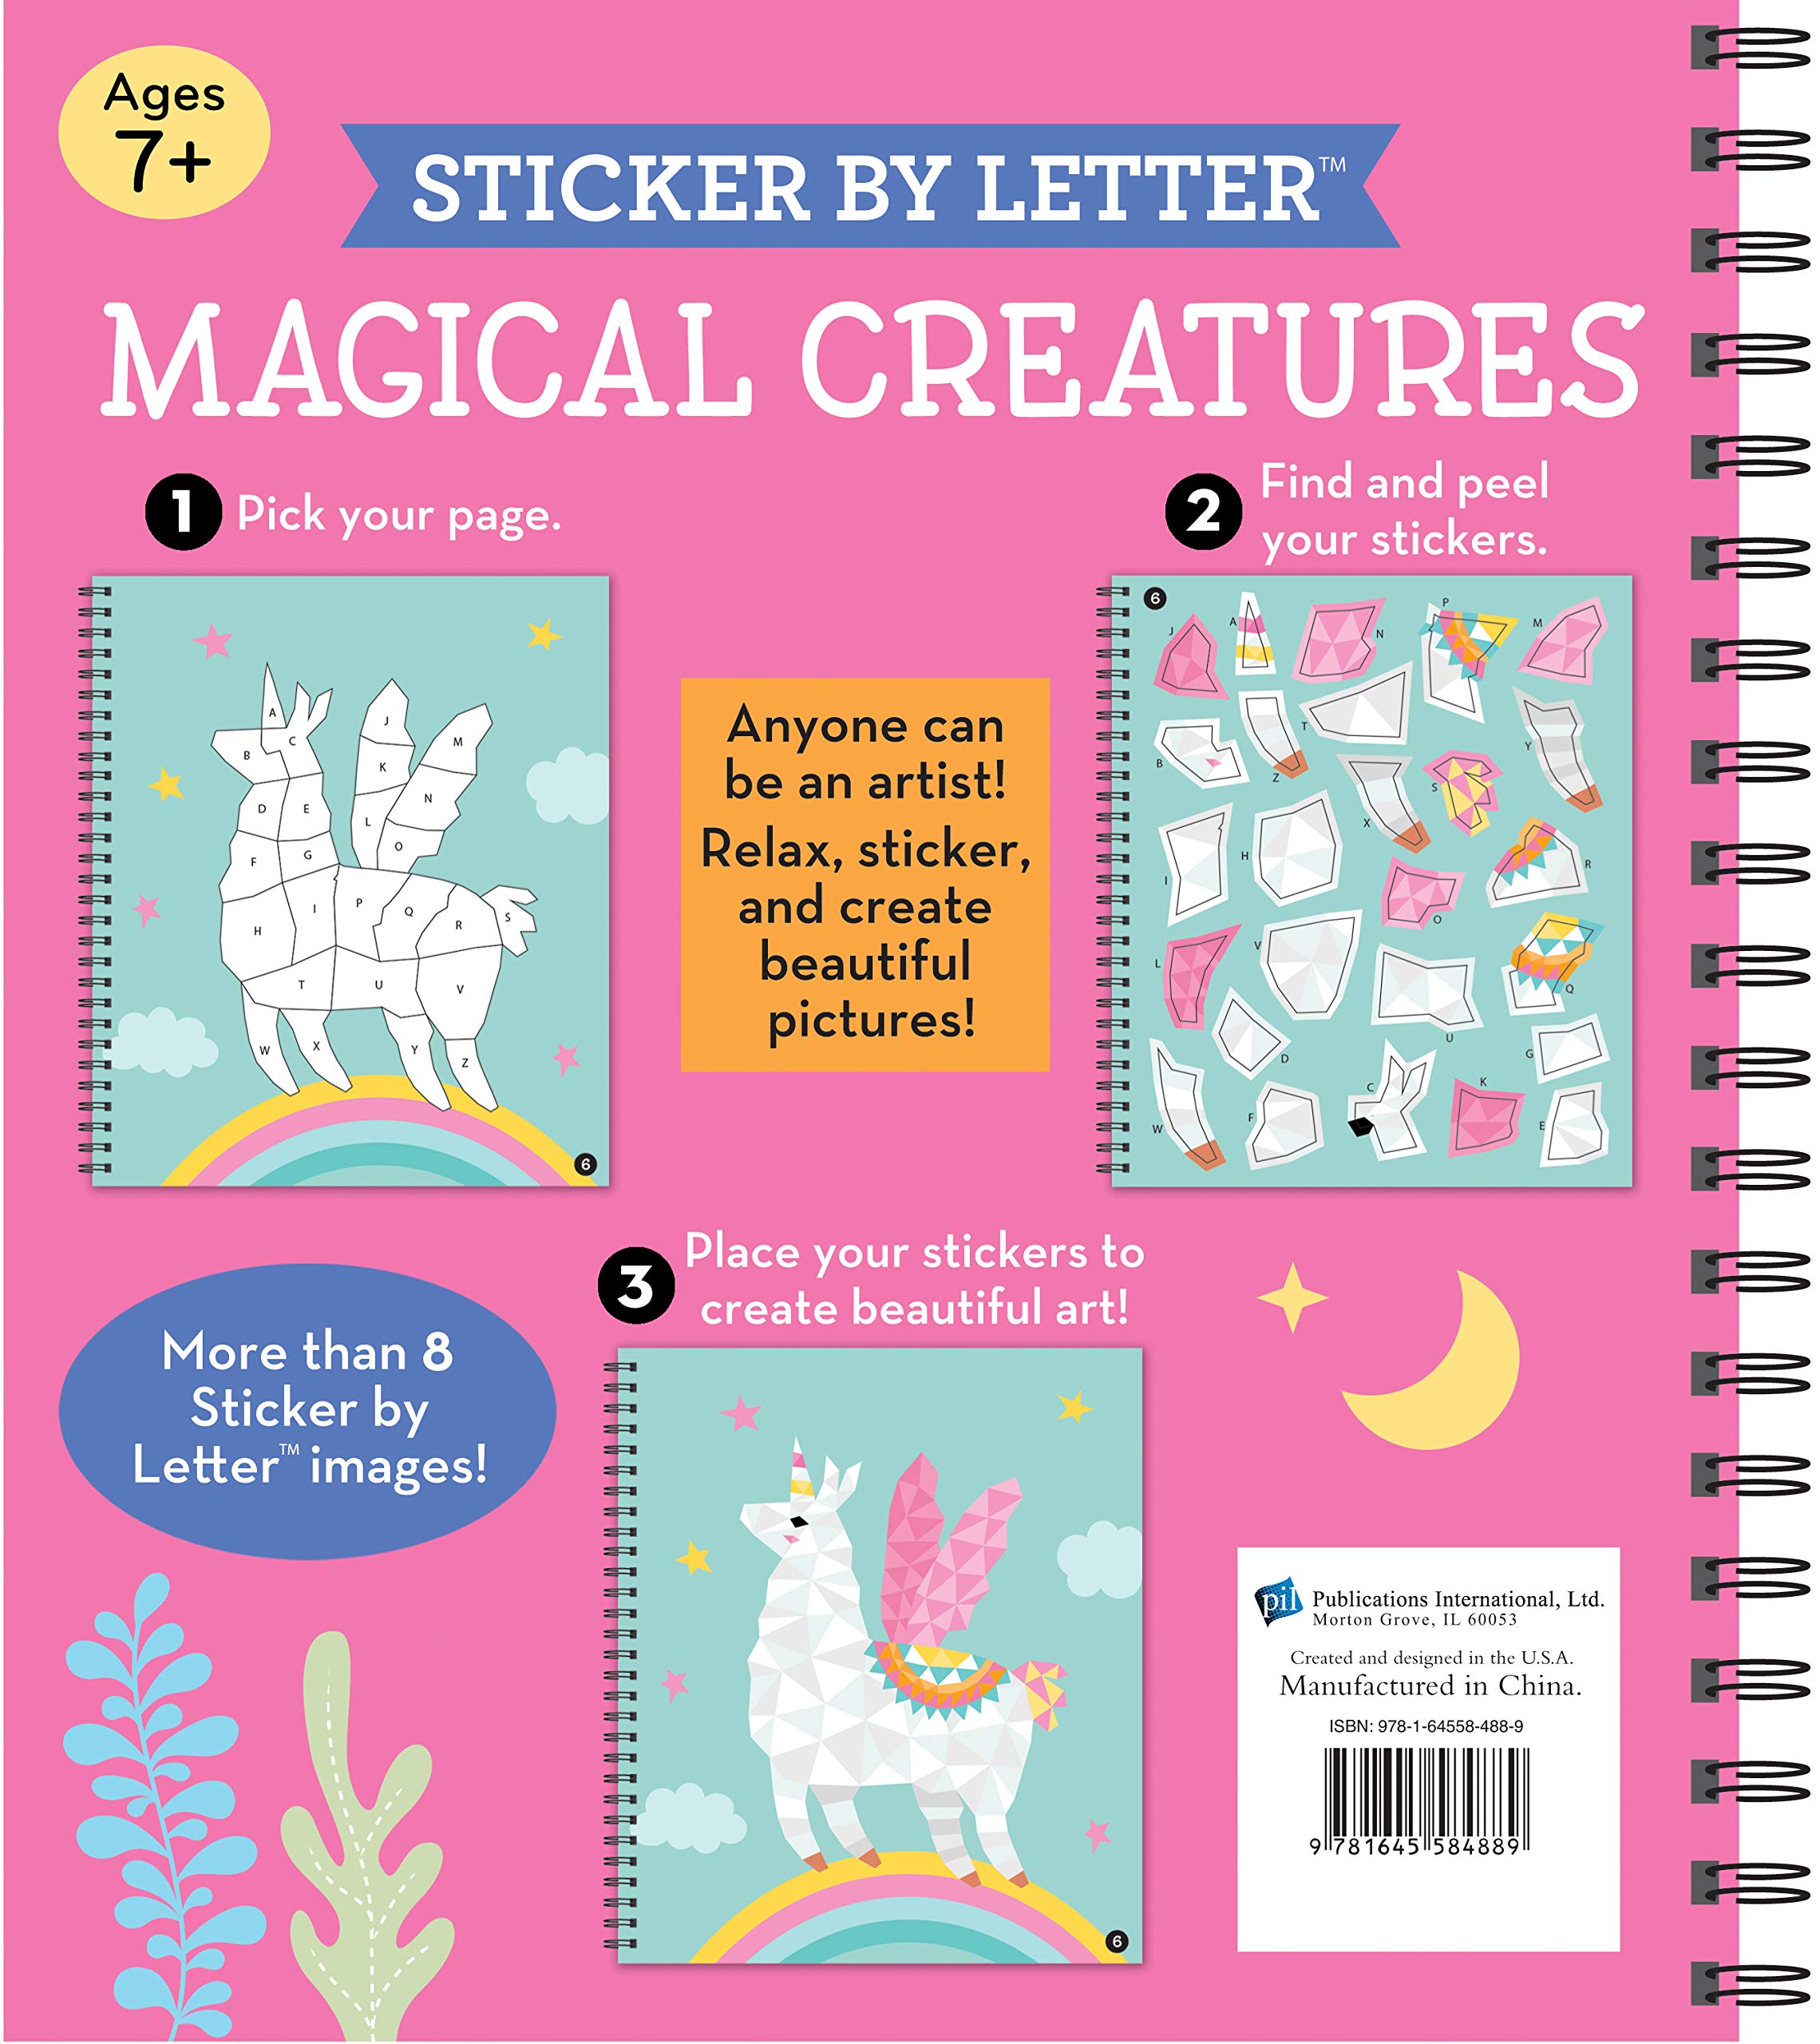 Brain Games - Sticker by Letter: Magical Creatures (Sticker Puzzles - Kids Activity Book)